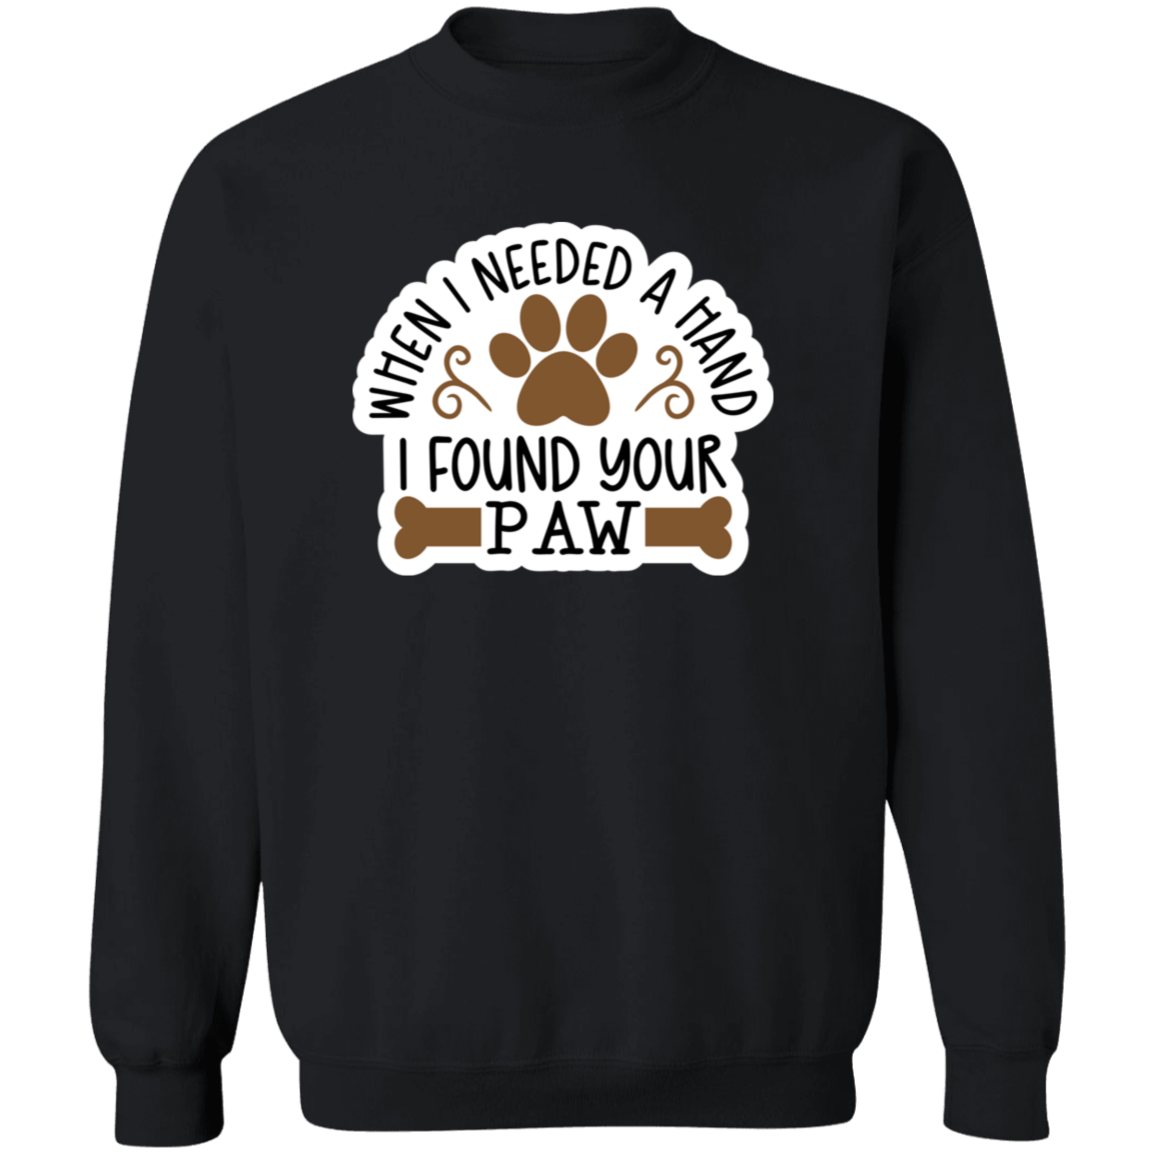 When I Needed a Hand I Found Your Paw Dog Rescue Crewneck Pullover Sweatshirt